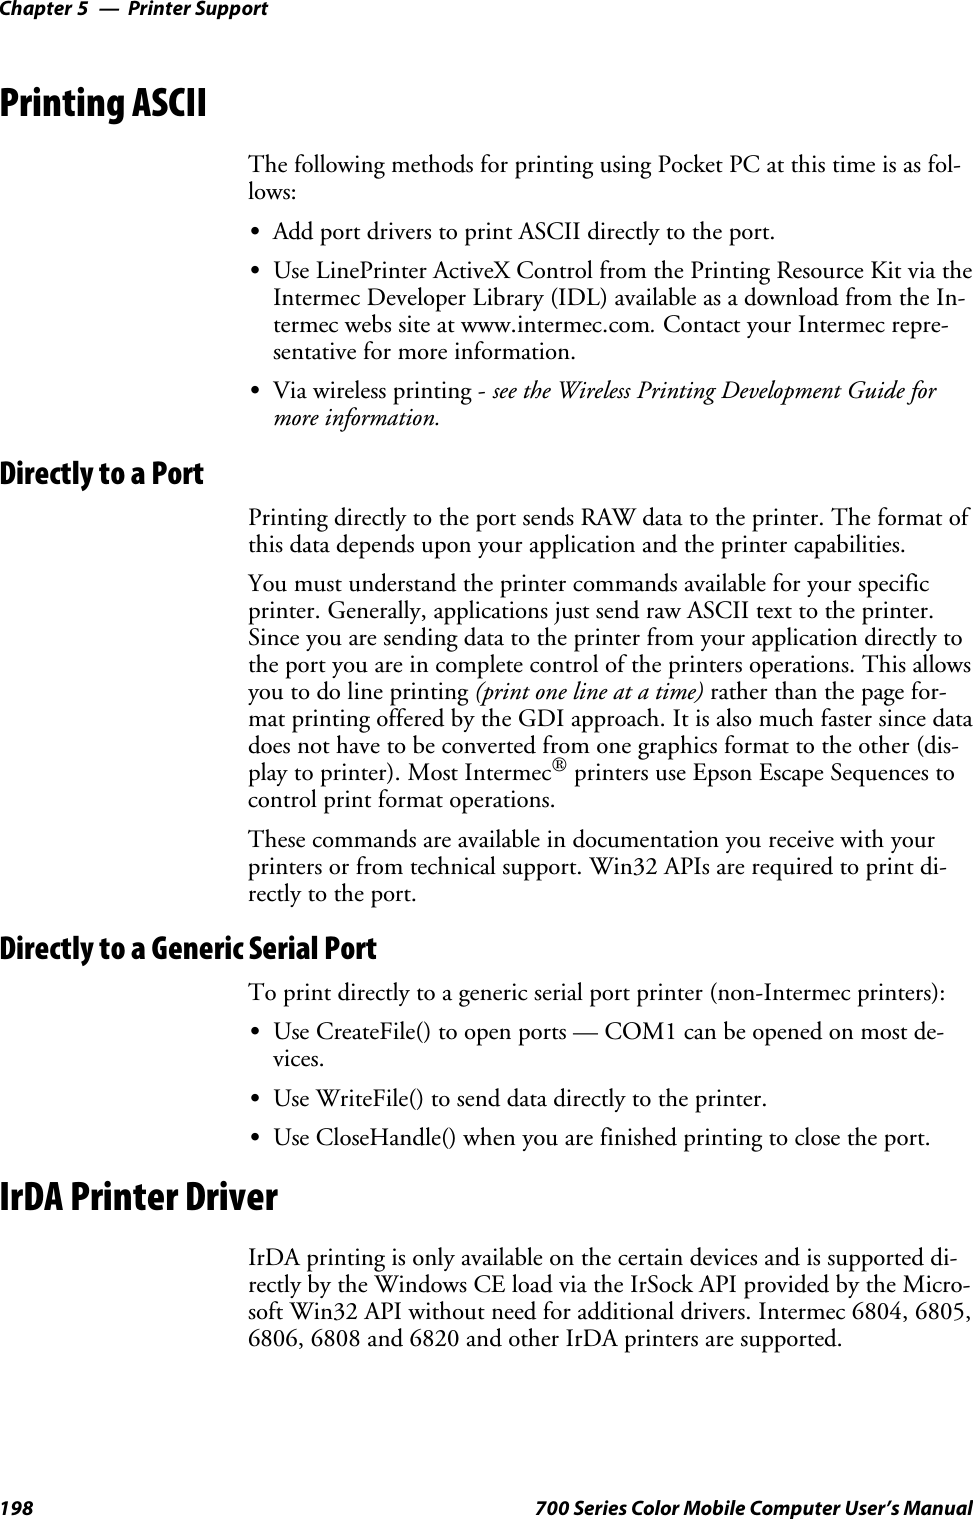 Printer SupportChapter —5198 700 Series Color Mobile Computer User’s ManualPrinting ASCIIThe following methods for printing using Pocket PC at this time is as fol-lows:SAdd port drivers to print ASCII directly to the port.SUse LinePrinter ActiveX Control from the Printing Resource Kit via theIntermec Developer Library (IDL) available as a download from the In-termec webs site at www.intermec.com.Contact your Intermec repre-sentative for more information.SVia wireless printing - see the Wireless Printing Development Guide formore information.Directly to a PortPrinting directly to the port sends RAW data to the printer. The format ofthis data depends upon your application and the printer capabilities.Youmustunderstandtheprintercommandsavailableforyourspecificprinter. Generally, applications just send raw ASCII text to the printer.Since you are sending data to the printer from your application directly tothe port you are in complete control of the printers operations. This allowsyoutodolineprinting(printonelineatatime)rather than the page for-mat printing offered by the GDI approach. It is also much faster since datadoes not have to be converted from one graphics format to the other (dis-play to printer). Most Intermec®printers use Epson Escape Sequences tocontrol print format operations.These commands are available in documentation you receive with yourprinters or from technical support. Win32 APIs are required to print di-rectly to the port.Directly to a Generic Serial PortTo print directly to a generic serial port printer (non-Intermec printers):SUse CreateFile() to open ports — COM1 can be opened on most de-vices.SUse WriteFile() to send data directly to the printer.SUse CloseHandle() when you are finished printing to close the port.IrDA Printer DriverIrDA printing is only available on the certain devices and is supported di-rectly by the Windows CE load via the IrSock API provided by the Micro-soft Win32 API without need for additional drivers. Intermec 6804, 6805,6806, 6808 and 6820 and other IrDA printers are supported.